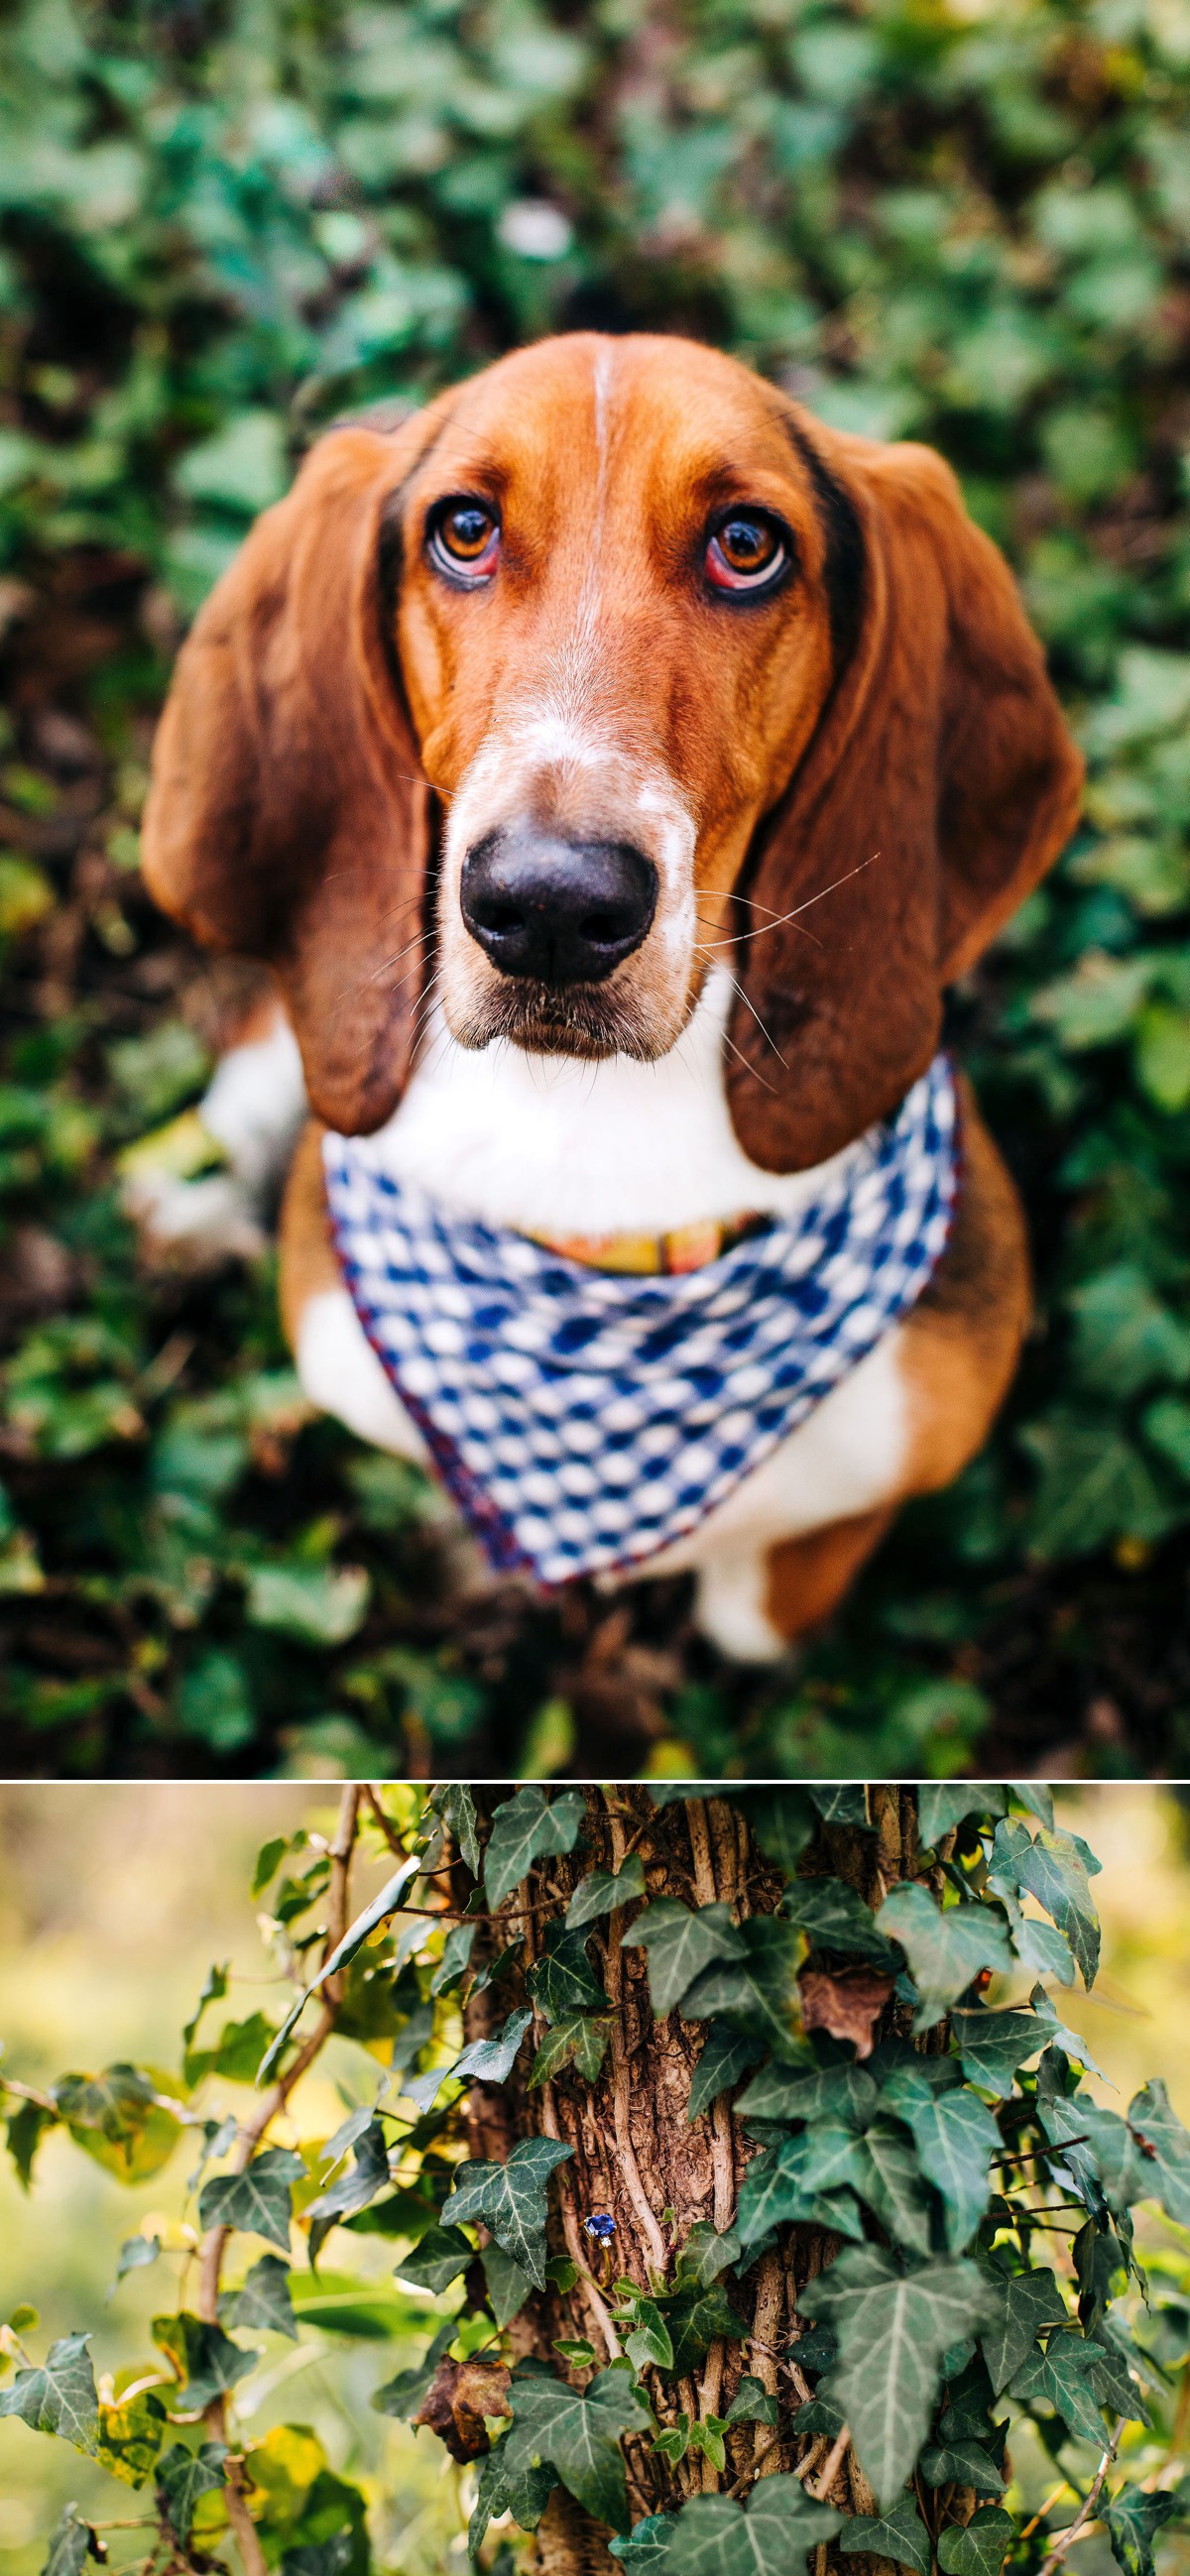 Wilderness Engagement Session, Wild Forest, North Carolina Forest Photos, NC Engagement Photographer, Couple with dog photos, basset hound